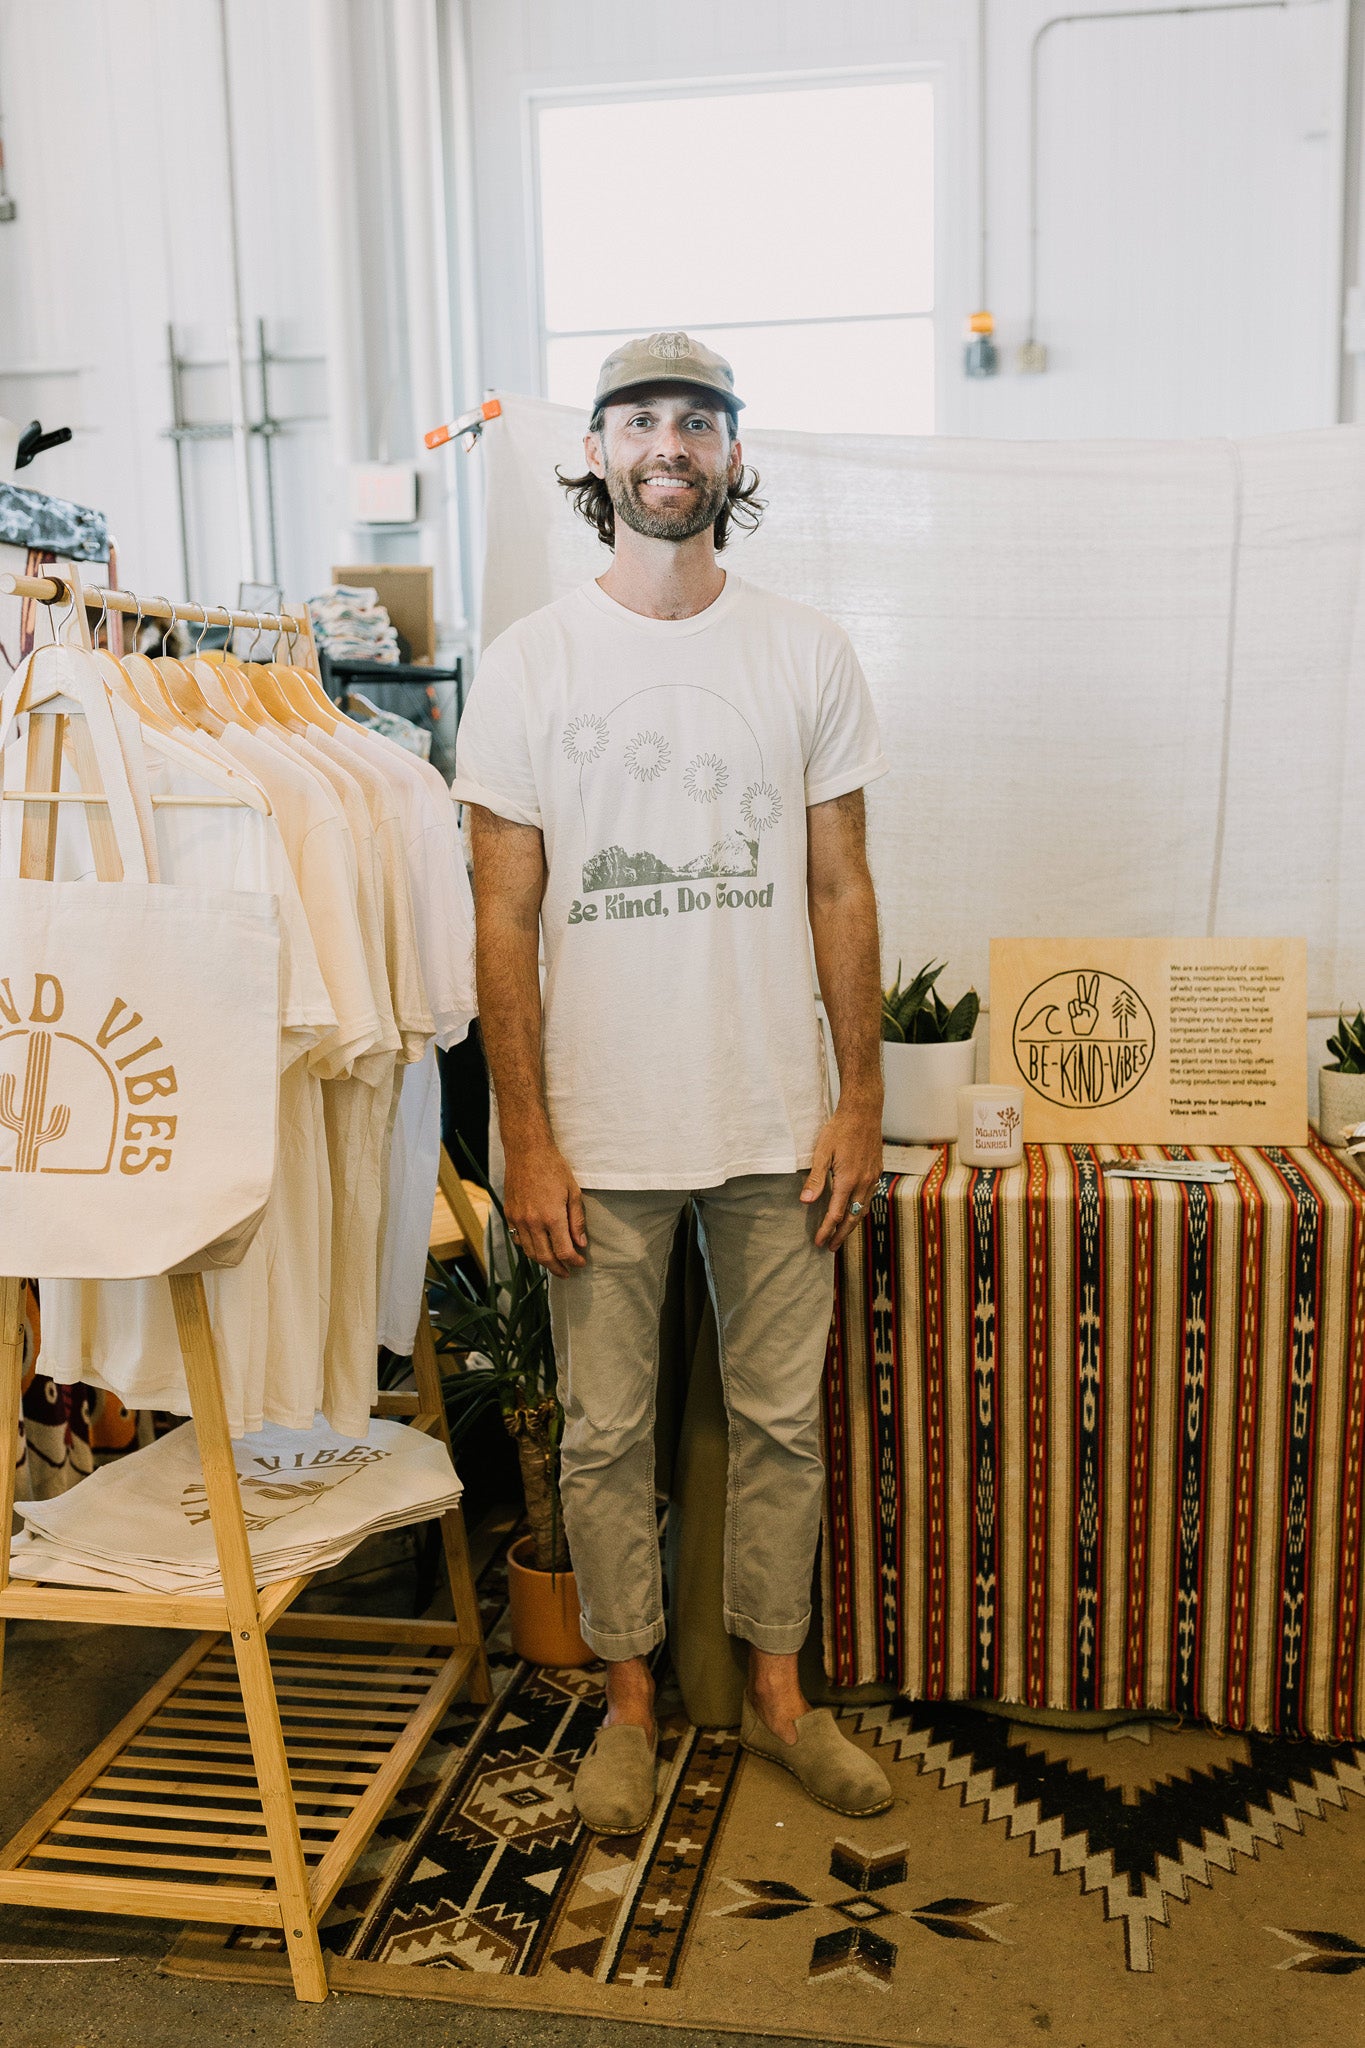 Be Kind Vibes Owner and founder standing in front of a Be Kind Vibes pop-up shop wearing a white Be Kind, Do Good t-shirt, khaki pants, and a green hat.